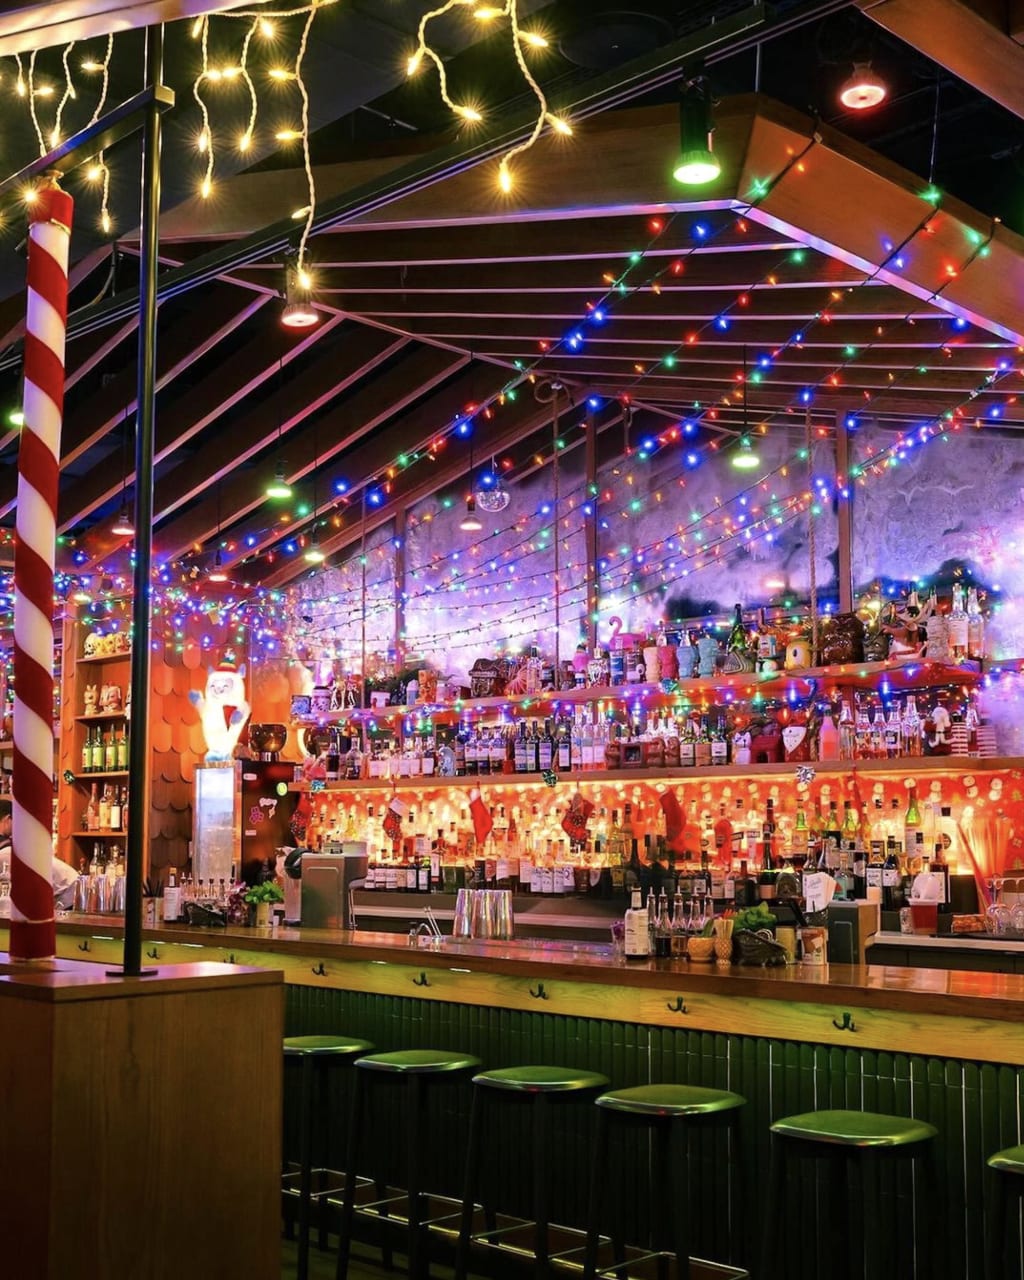 10+ Festive Pop-up Bars & Restaurants in Boston to Visit During the